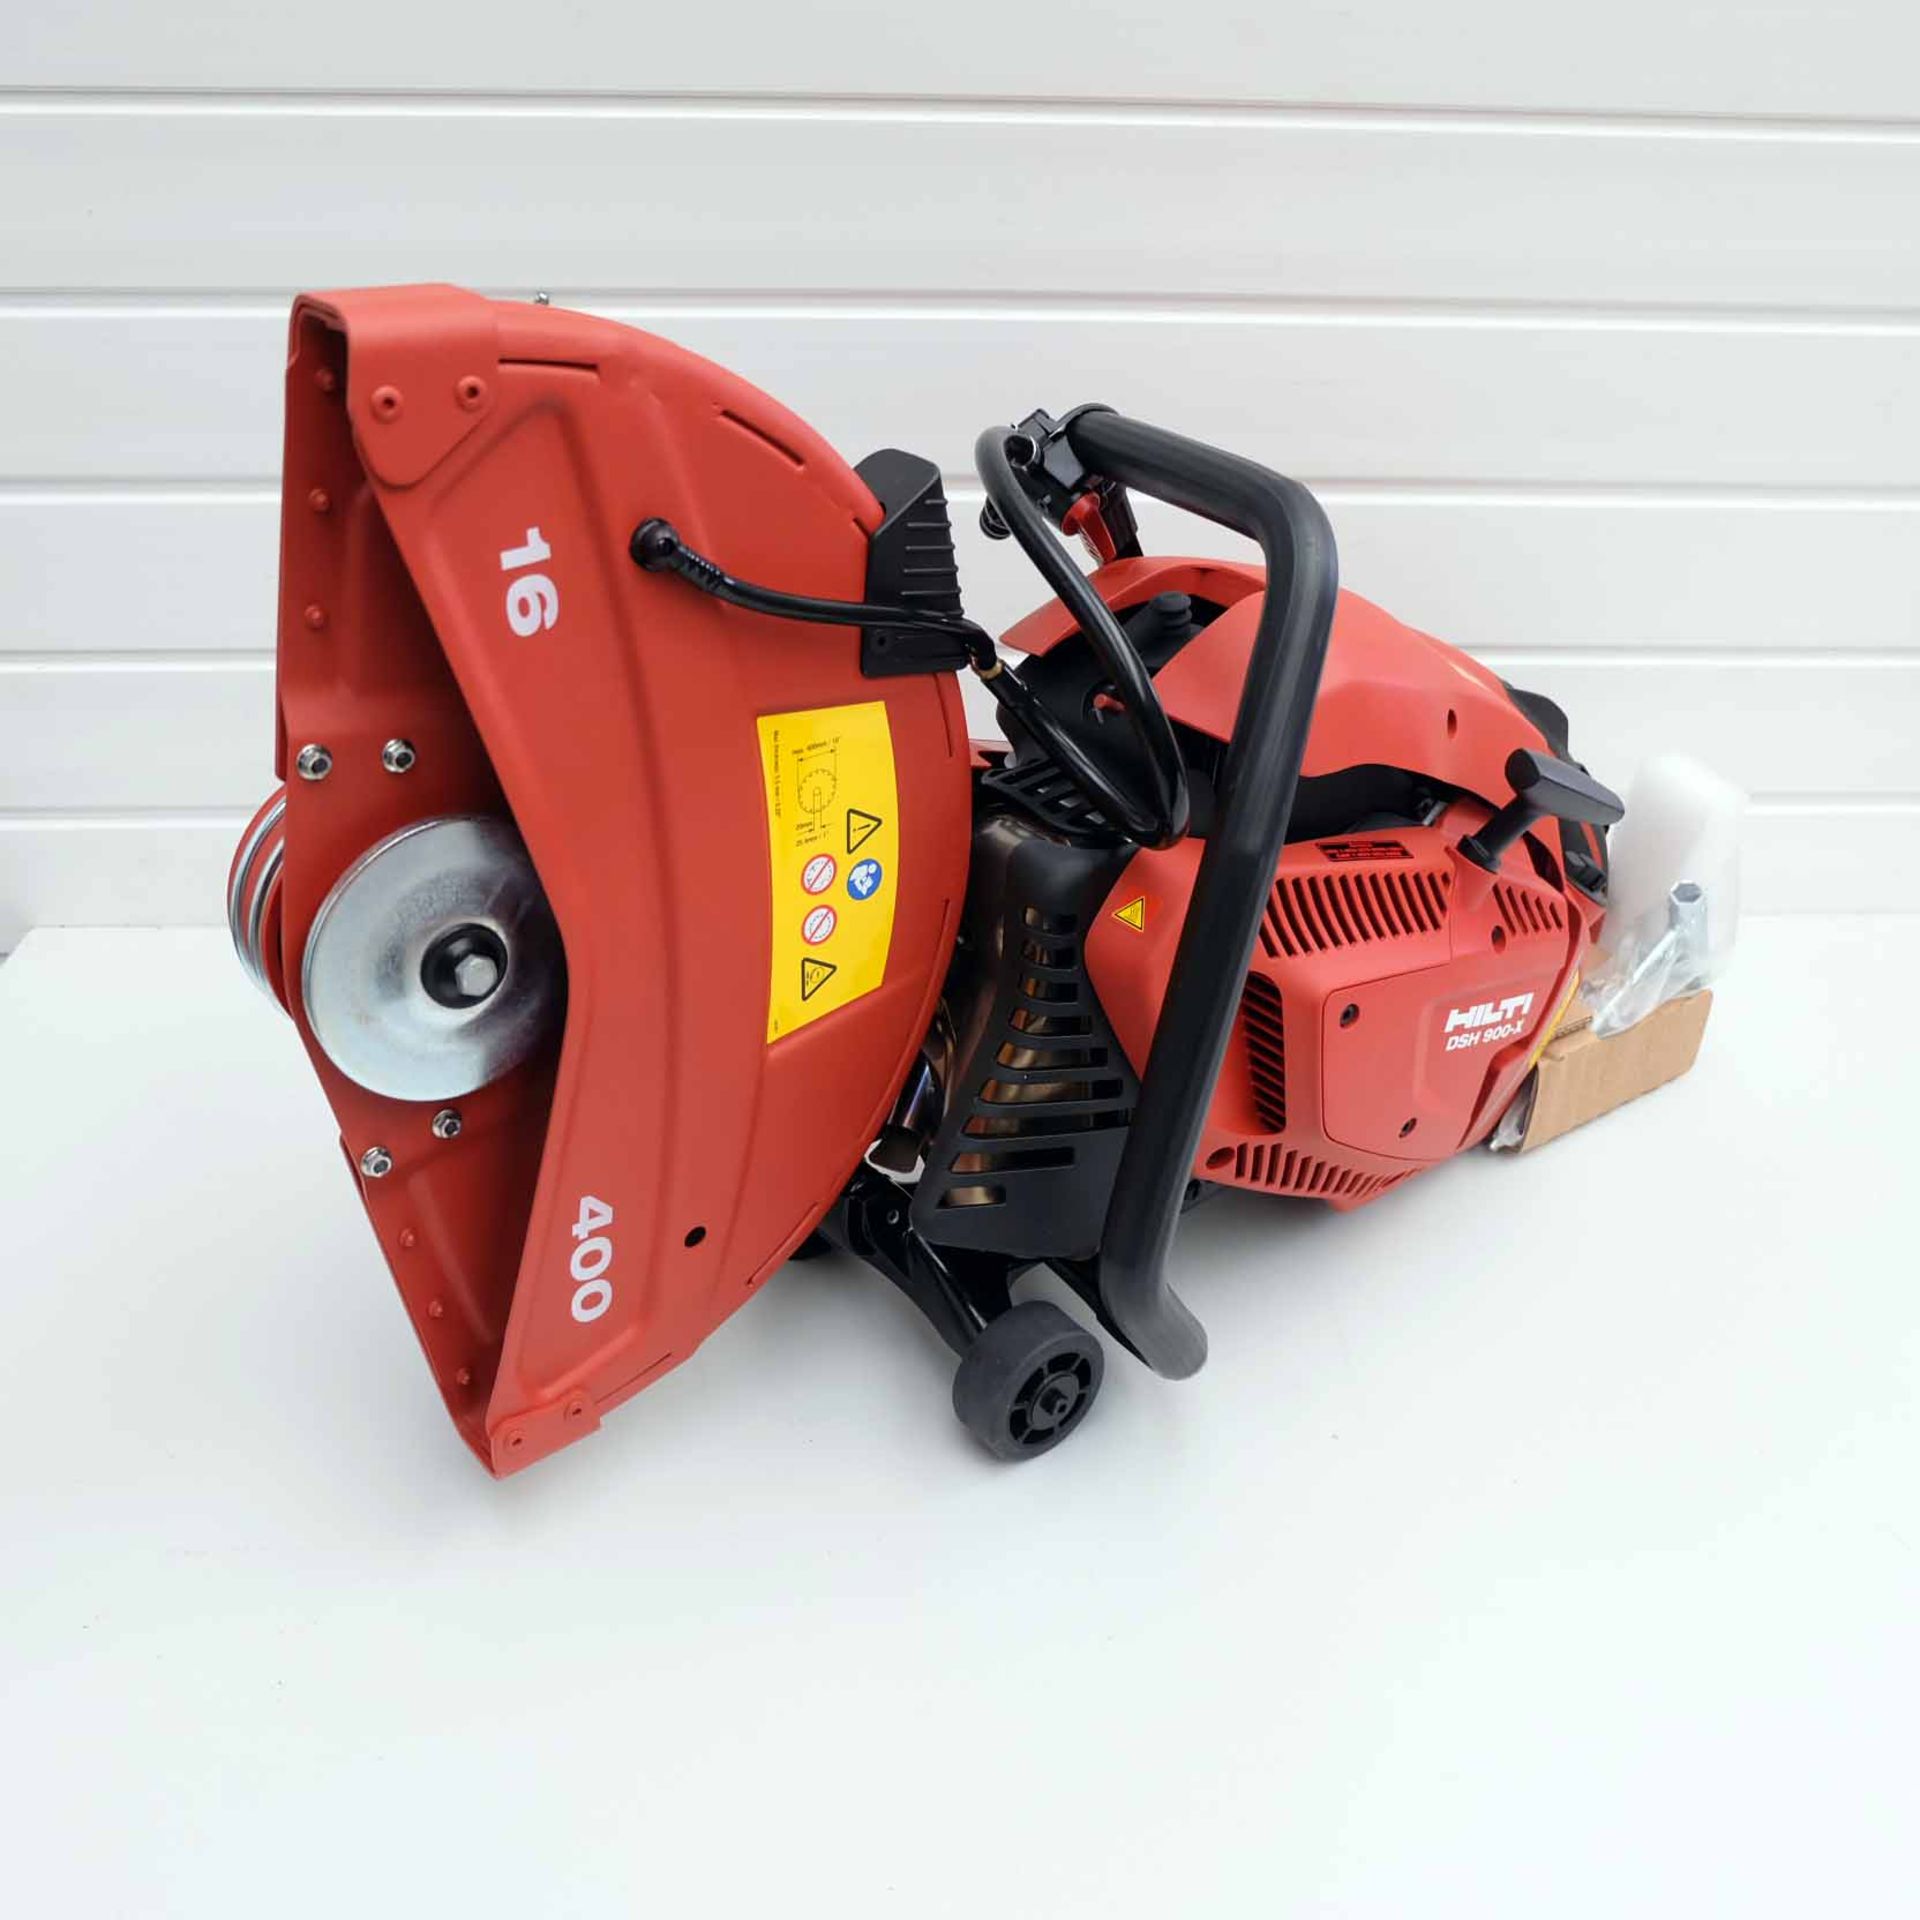 Hilti Hand Held Gas Saw. Model DSH 900-X 16". Complete With SP-16"x1" Blade. Easy Start Auto-Choke S - Image 5 of 22